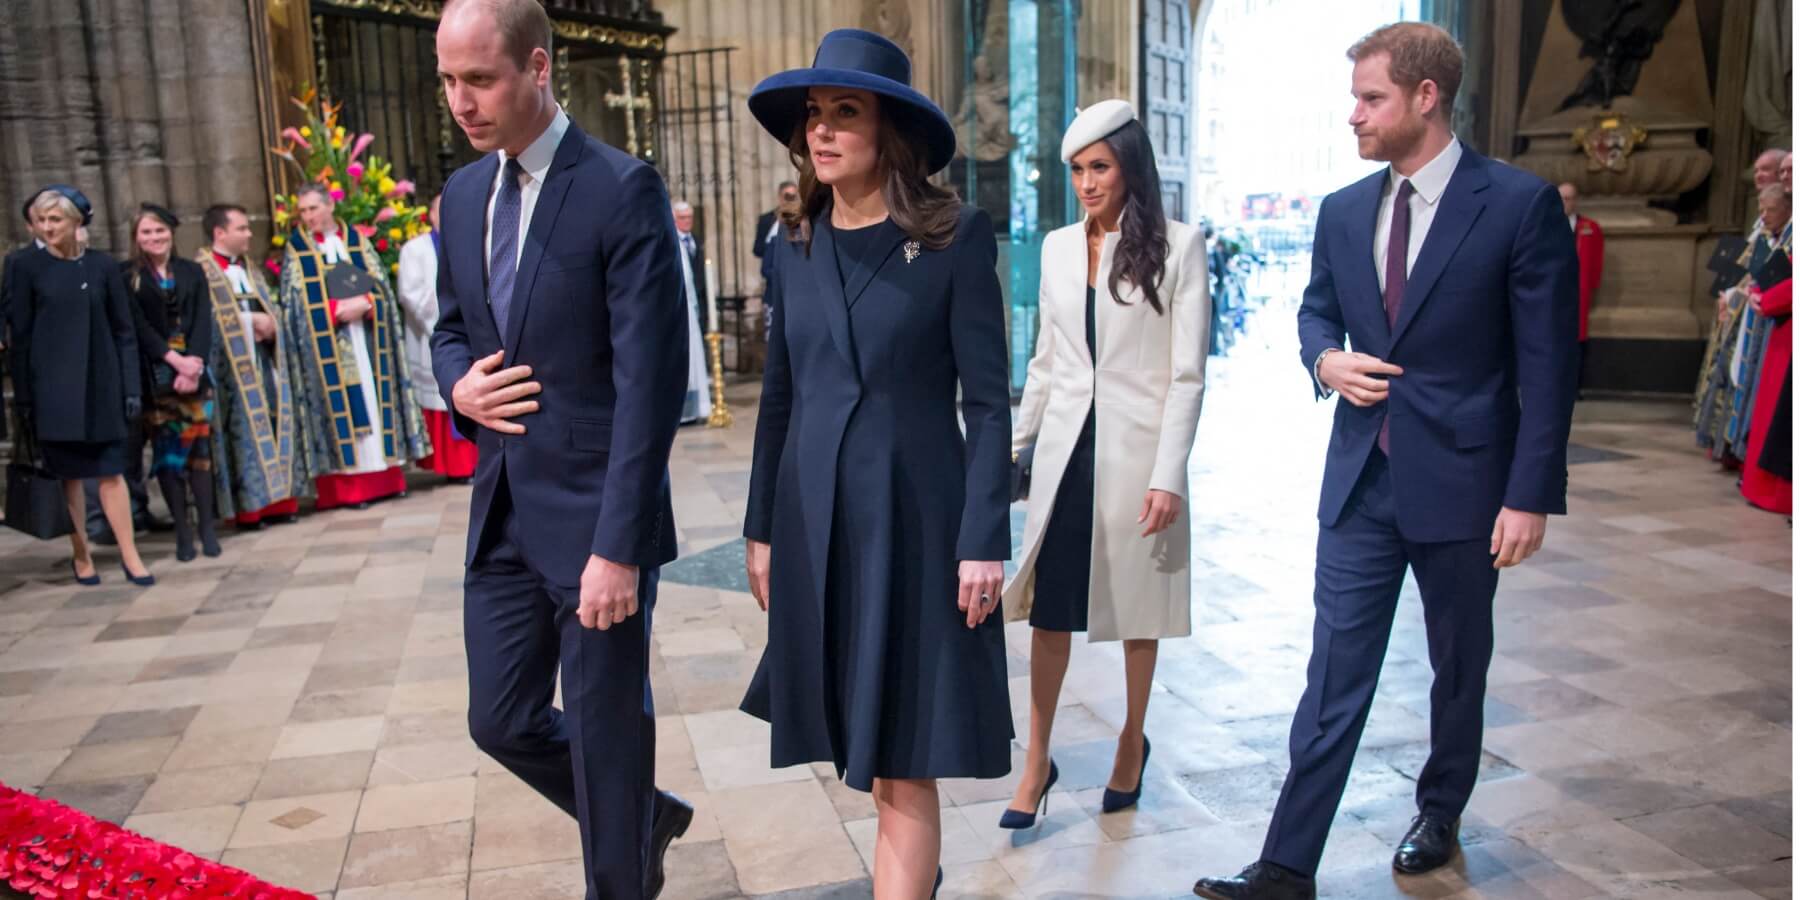 Prince William, Kate Middleton, Meghan Markle, and Prince Harry attend a Commonwealth Day Service at Westminster Abbey in central London, on March 12, 2018.